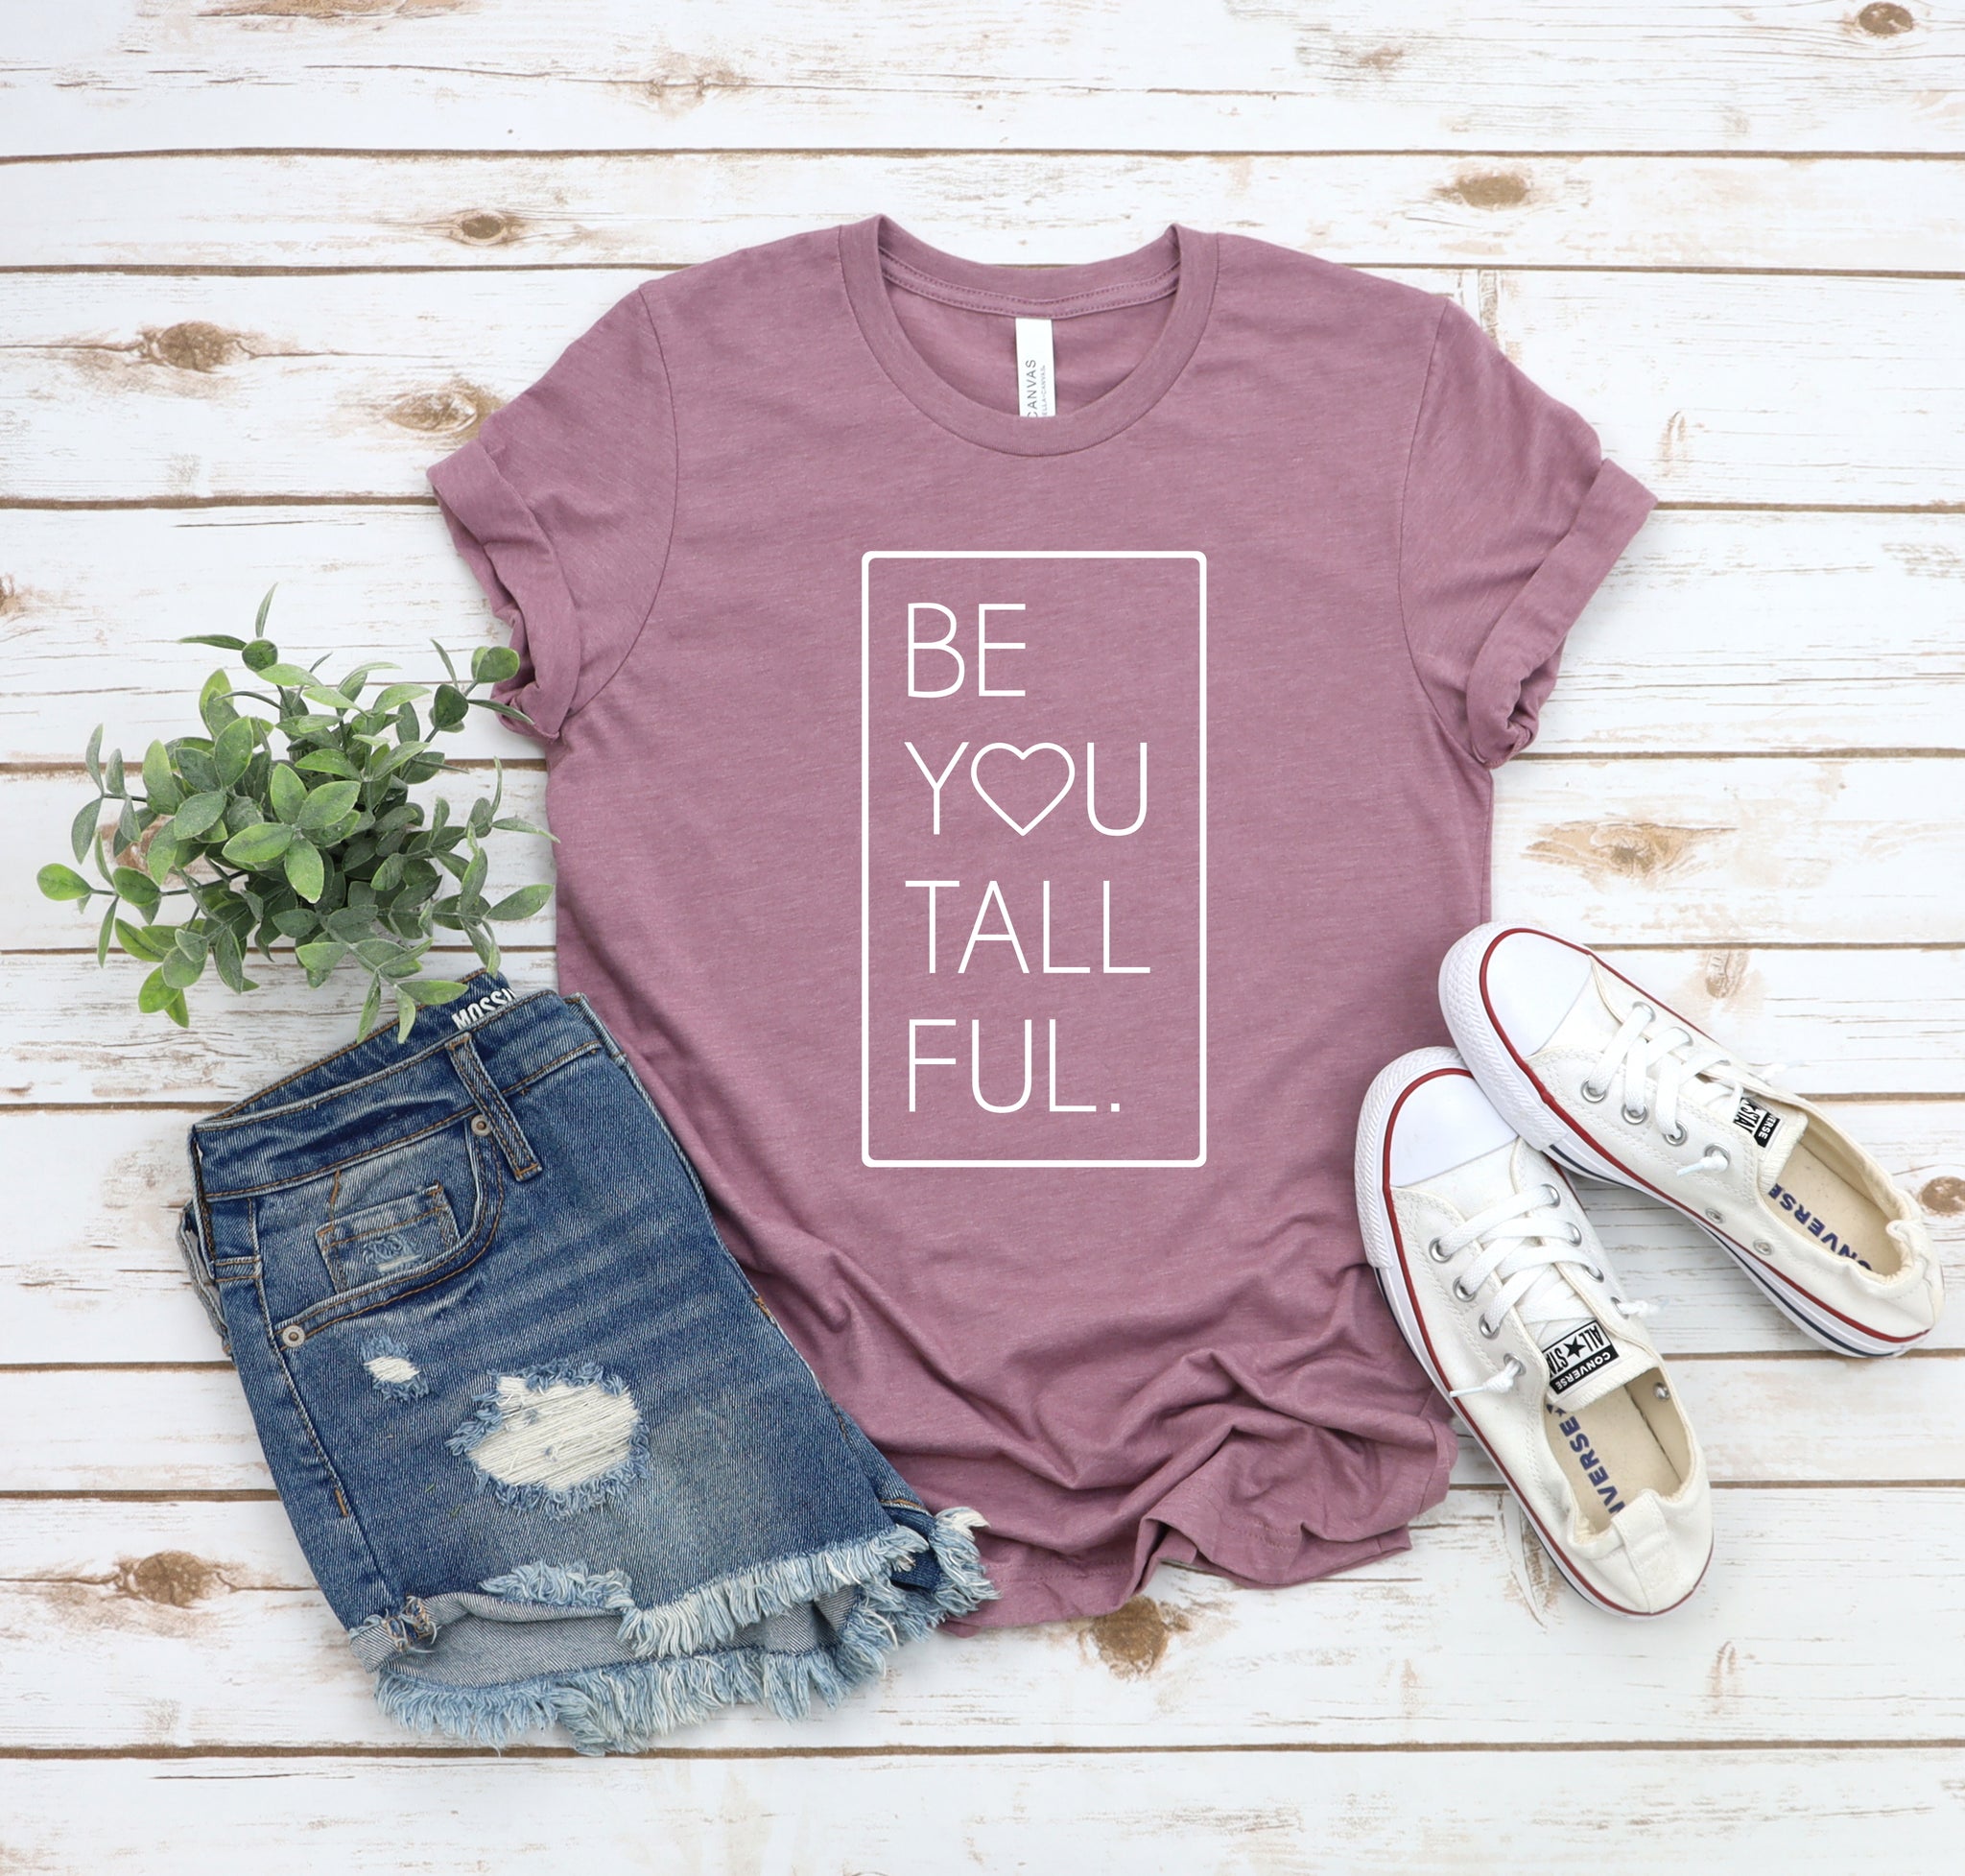 "Be-You-Tall-Ful" cute graphic t-shirt for tall girls.